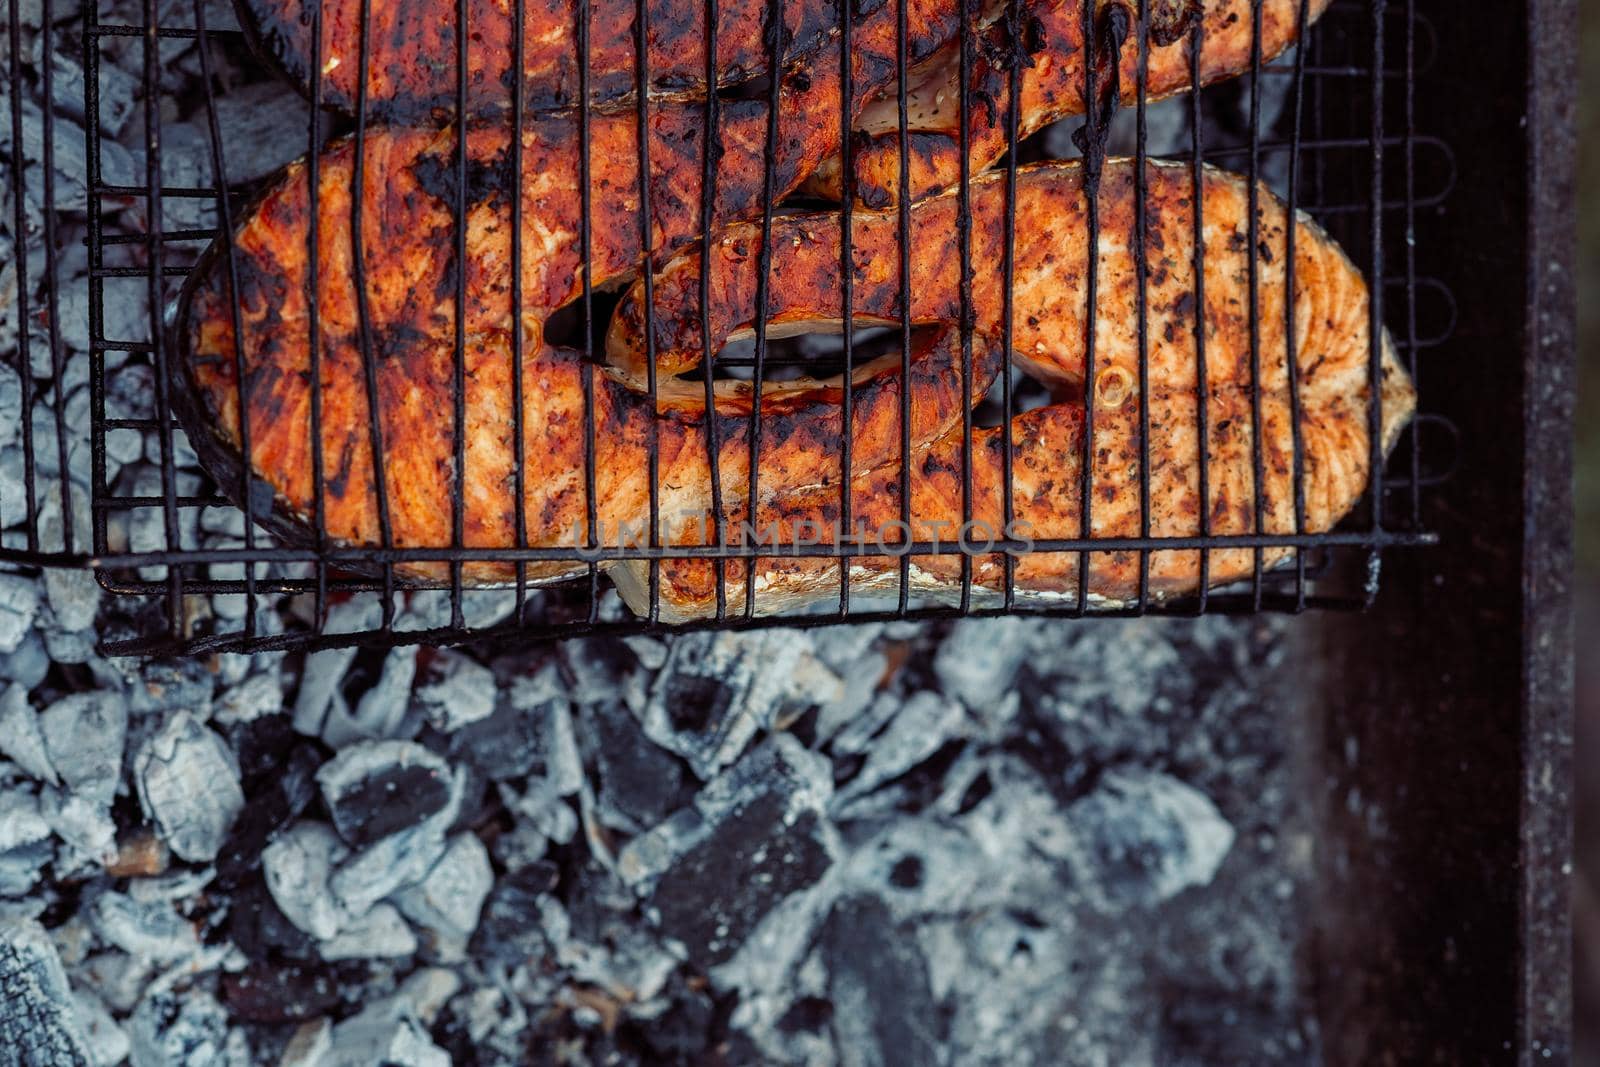 cooking fish outdoors barbecue close-up charcoal meal. High quality photo